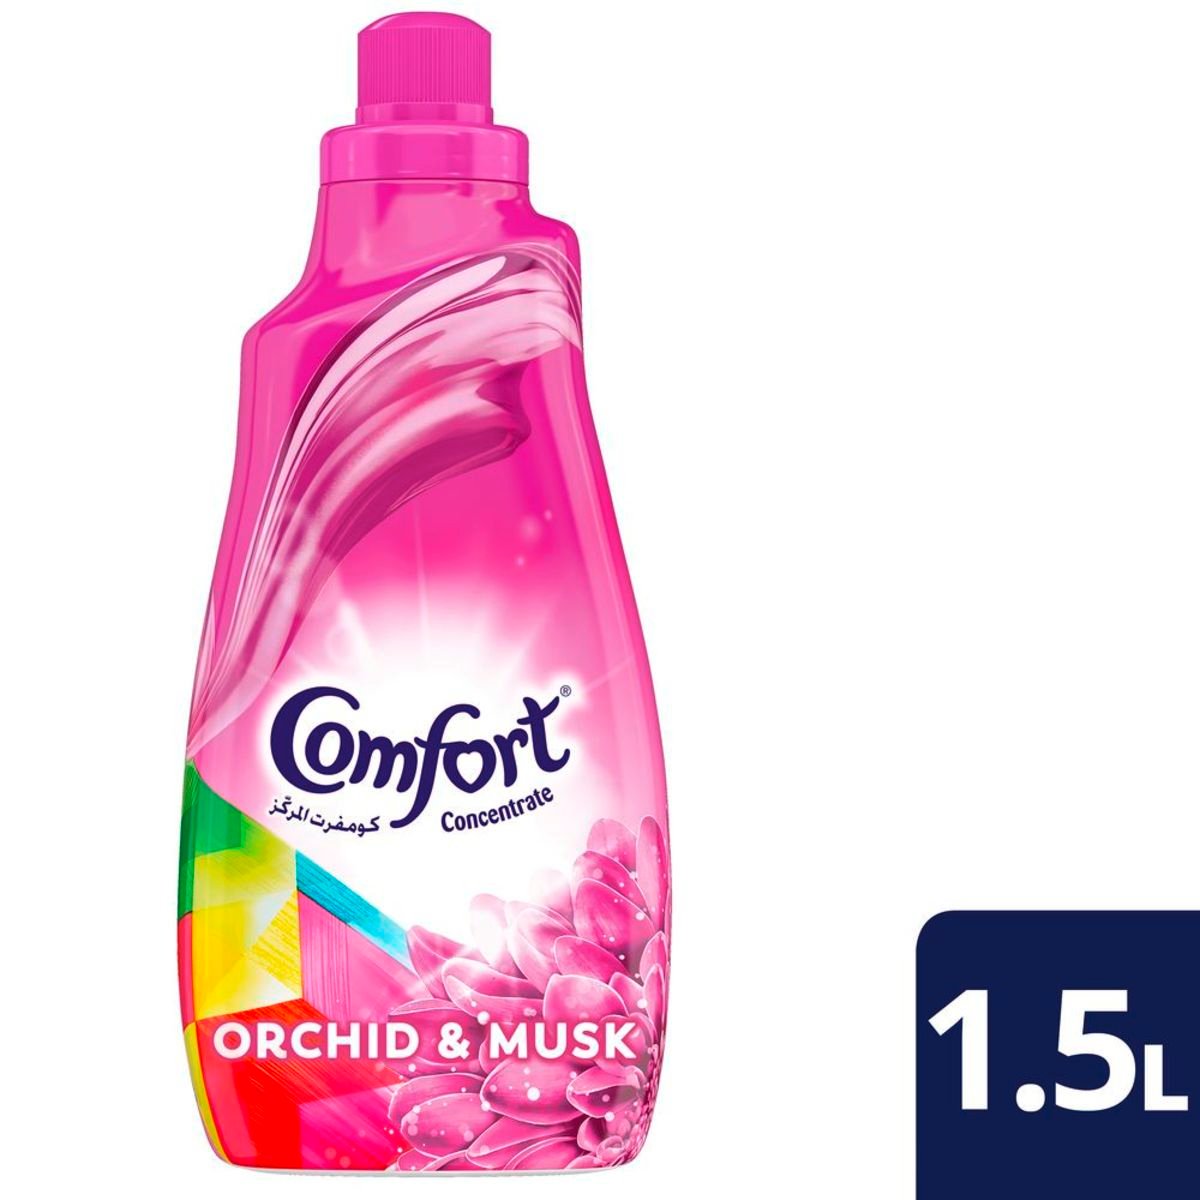 Comfort Concentrated Fabric Softener Orchid & Musk 1.5Litre